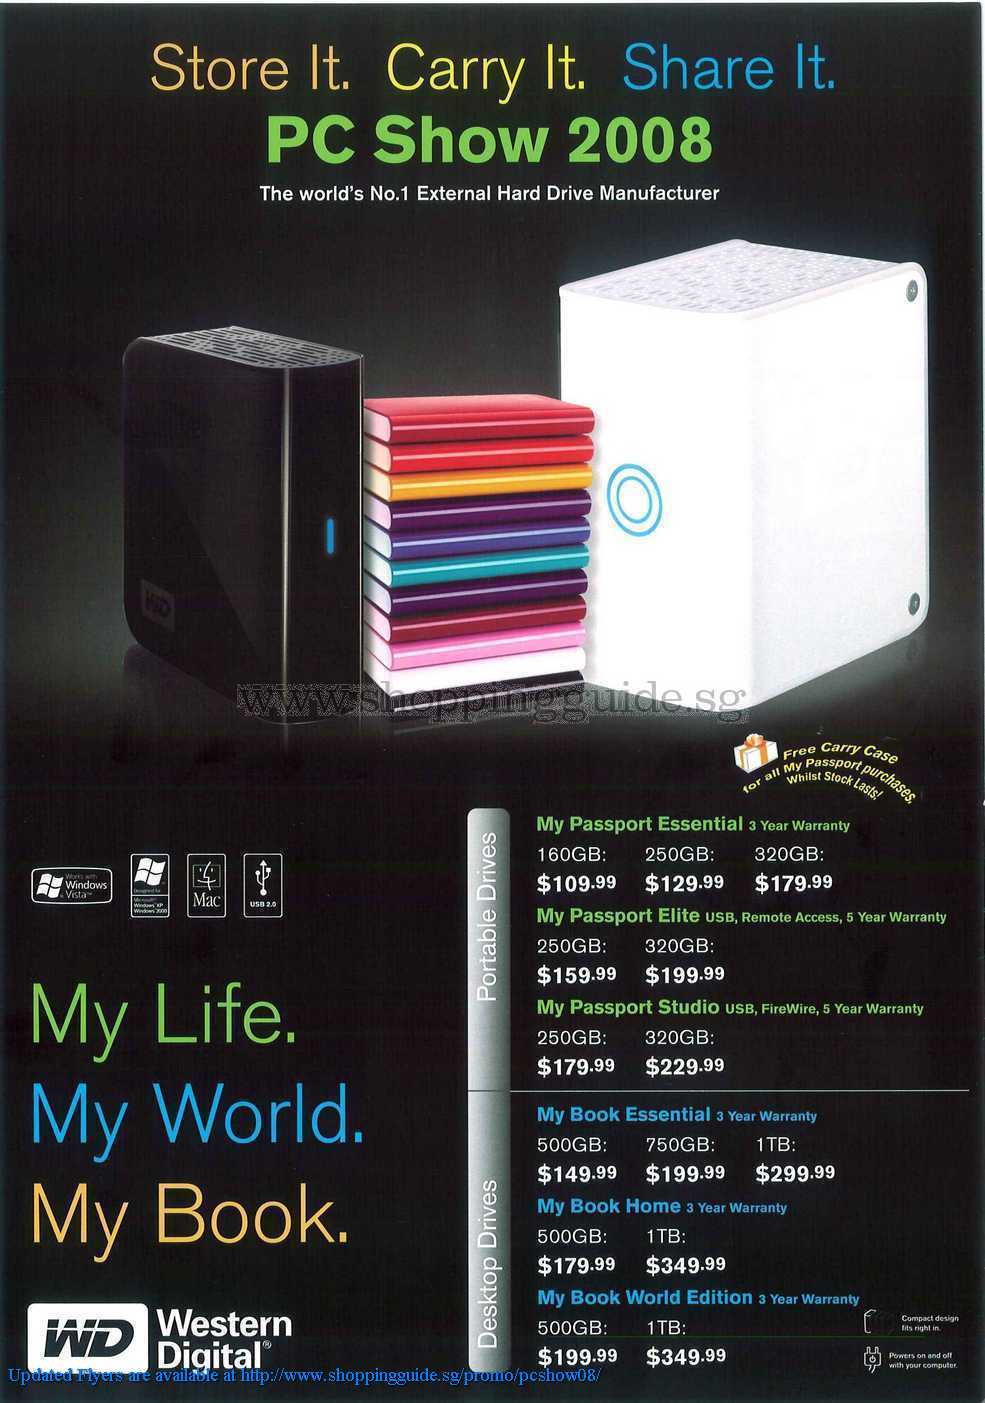 PC Show 2008 price list image brochure of Western Digital ShoppingGuide.SG-PcShow08-003